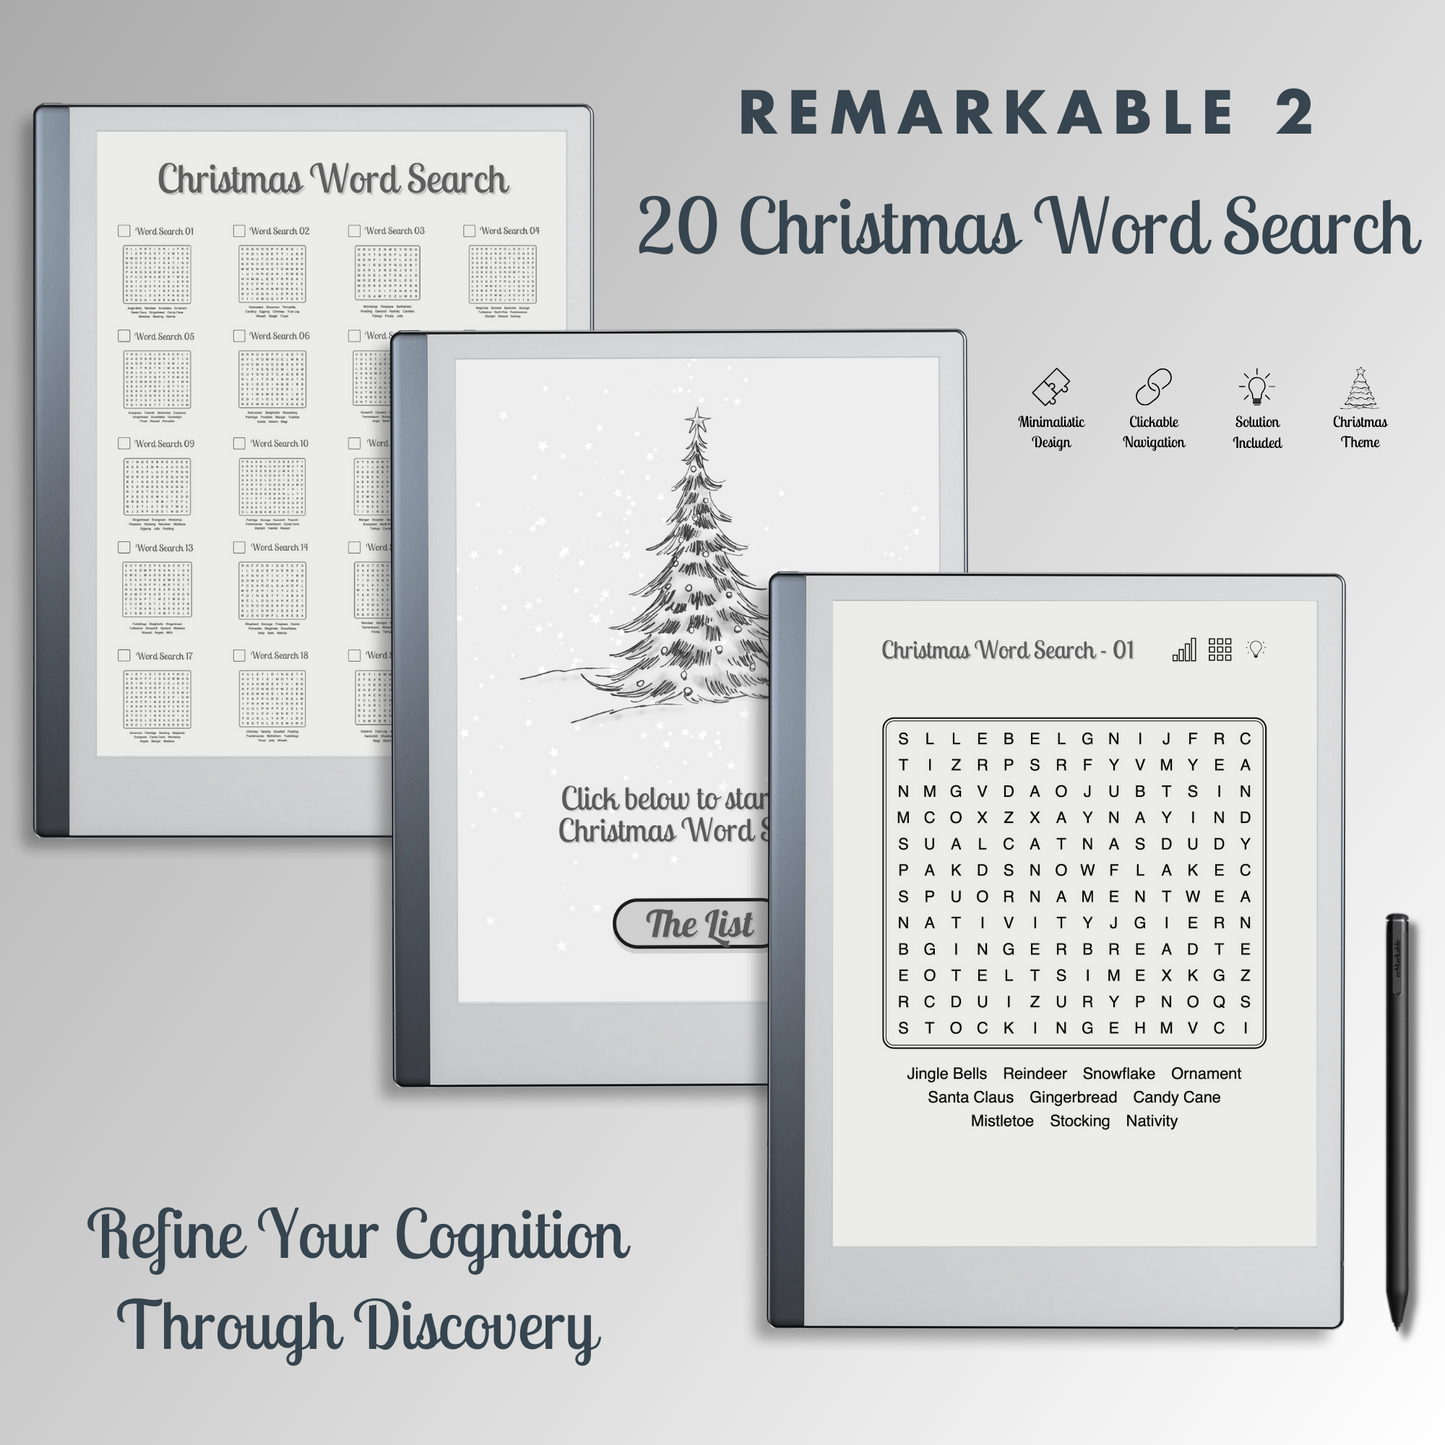 This is a Digital Download of 20 Christmas Word Search Puzzles designed for Remarkable 2.